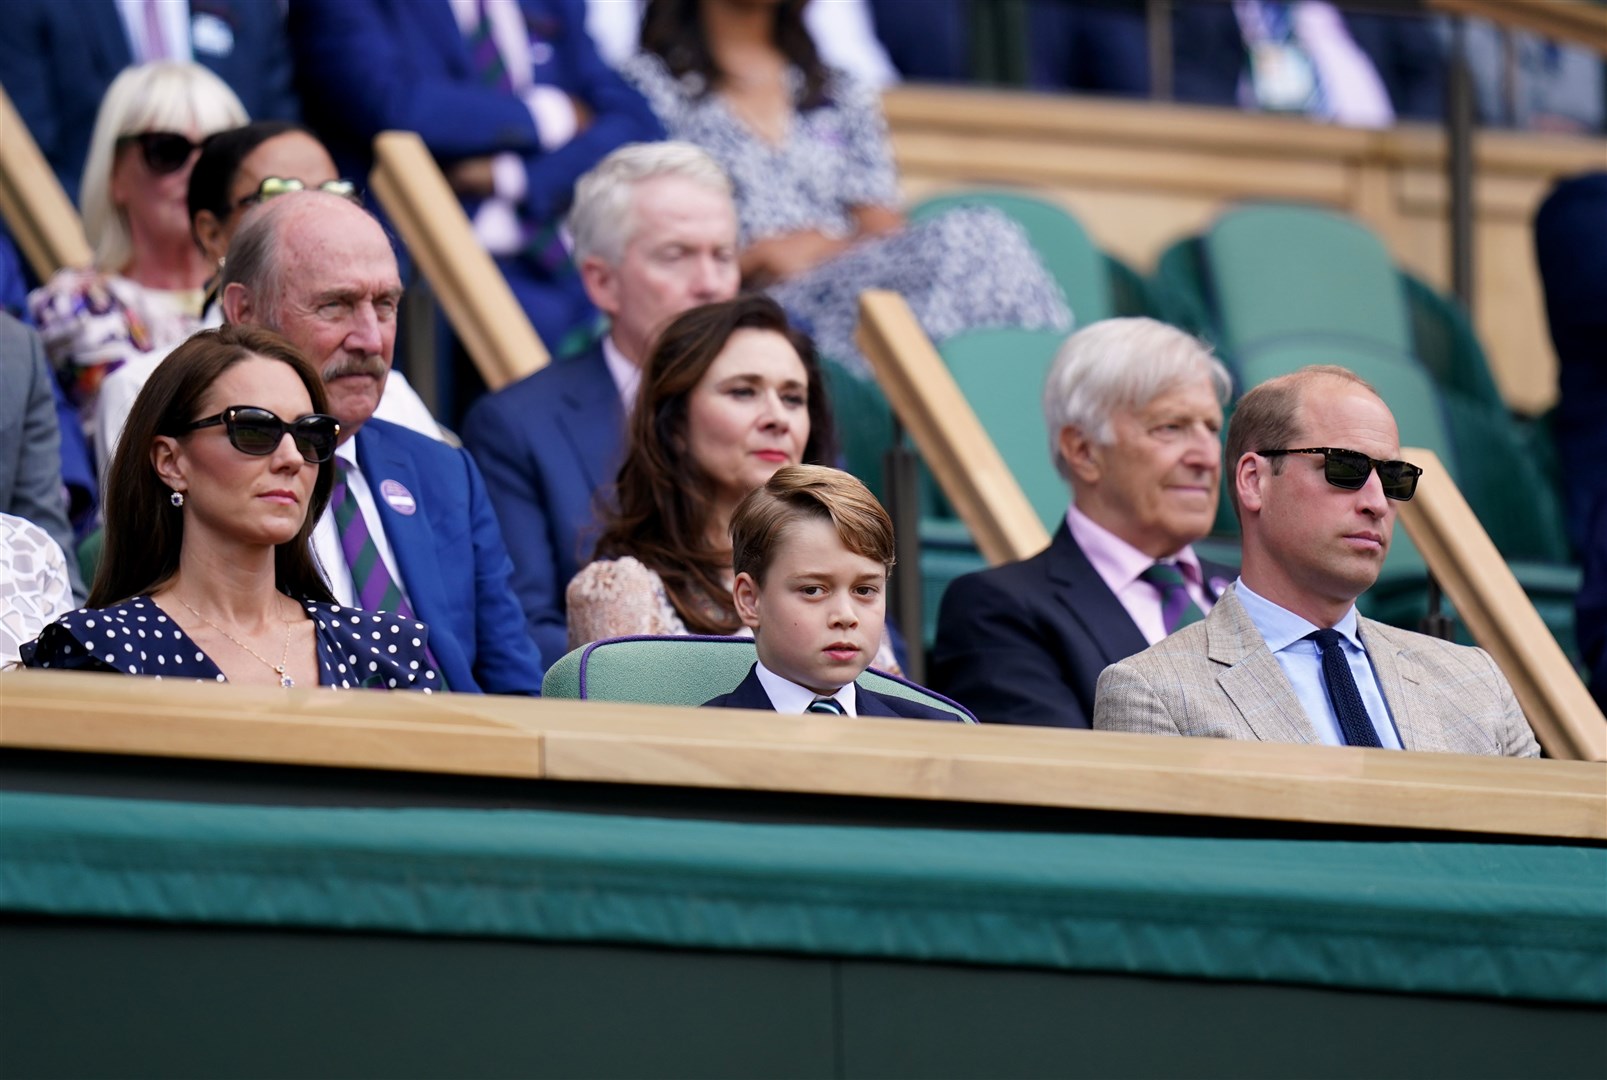 The Duke and Duchess of Cambridge and Prince George are watching the final from the royal box (Adam Davy/PA)